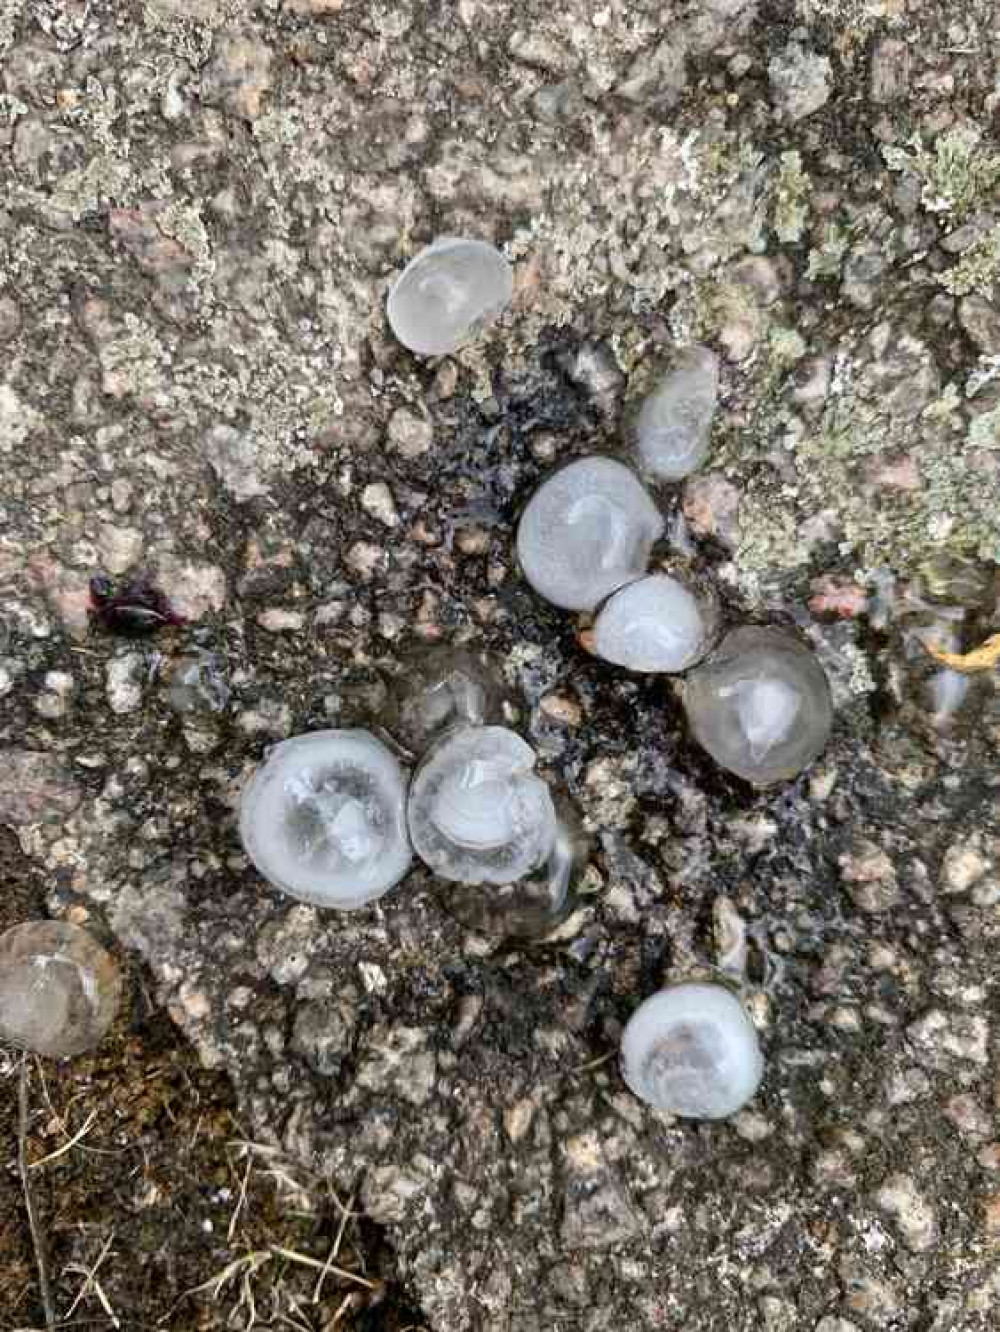 Huge hailstones photographed by Emma Durnford